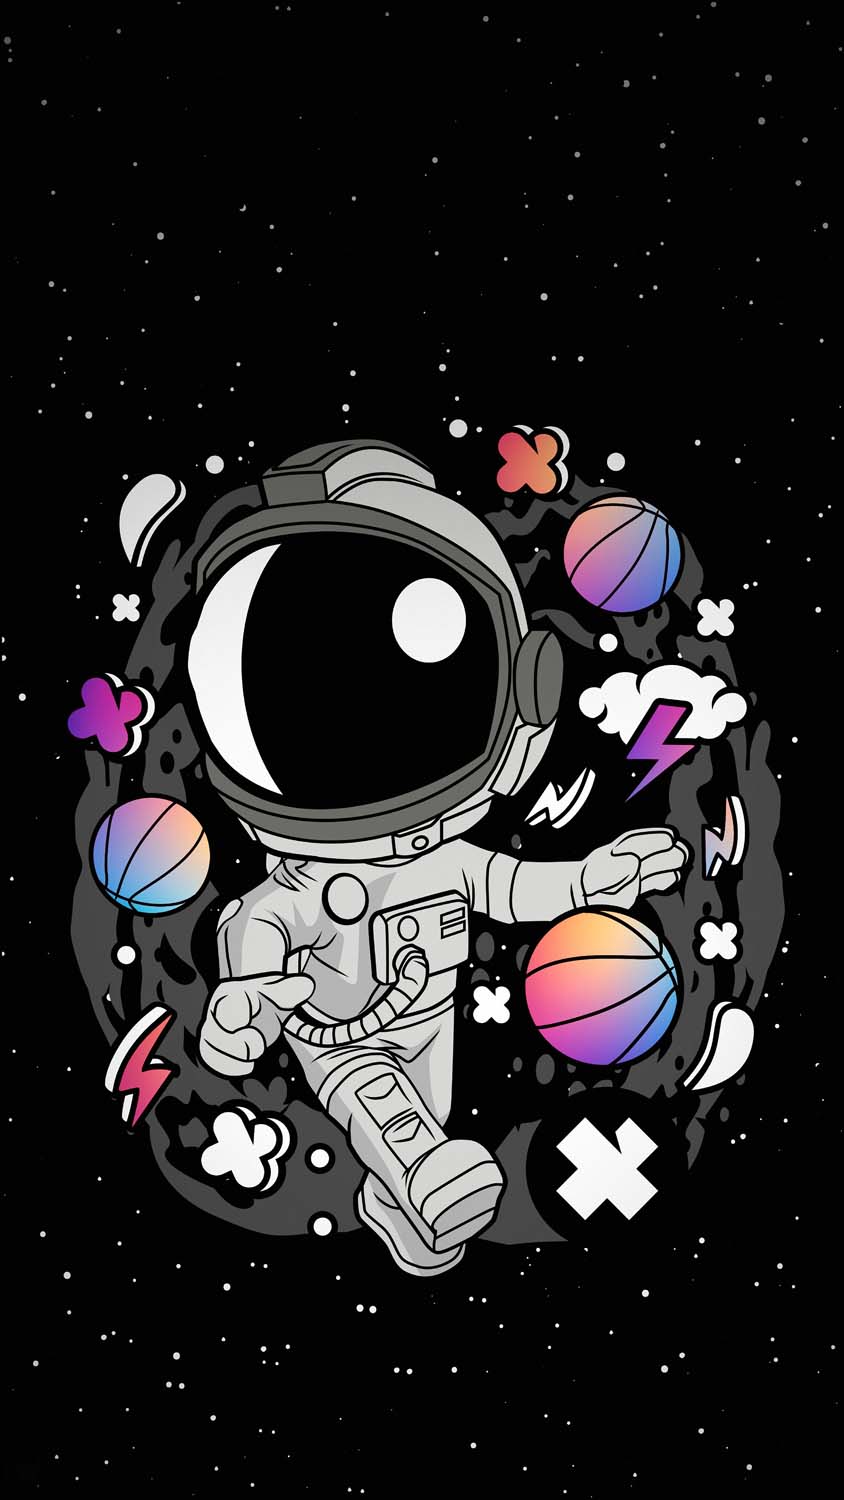 Astronaut Space Game IPhone Wallpaper HD - IPhone Wallpapers : iPhone  Wallpapers